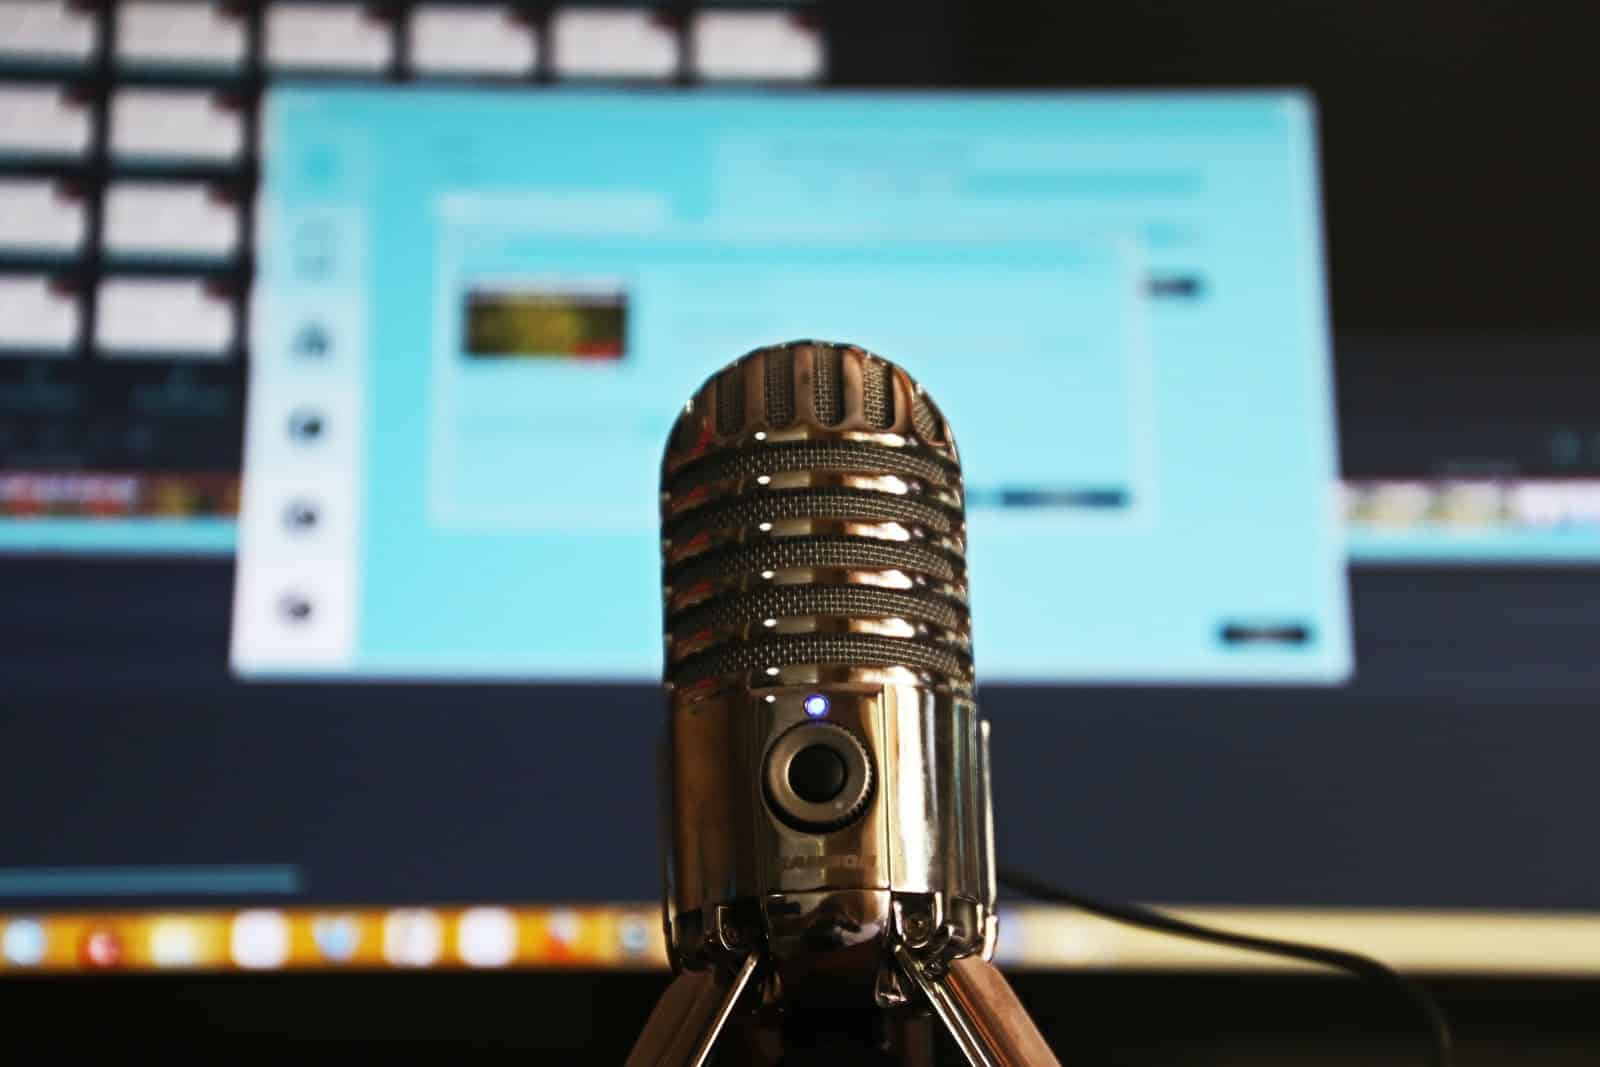 Microphone in front of a computer screen ready to record a podcast for a startup business.